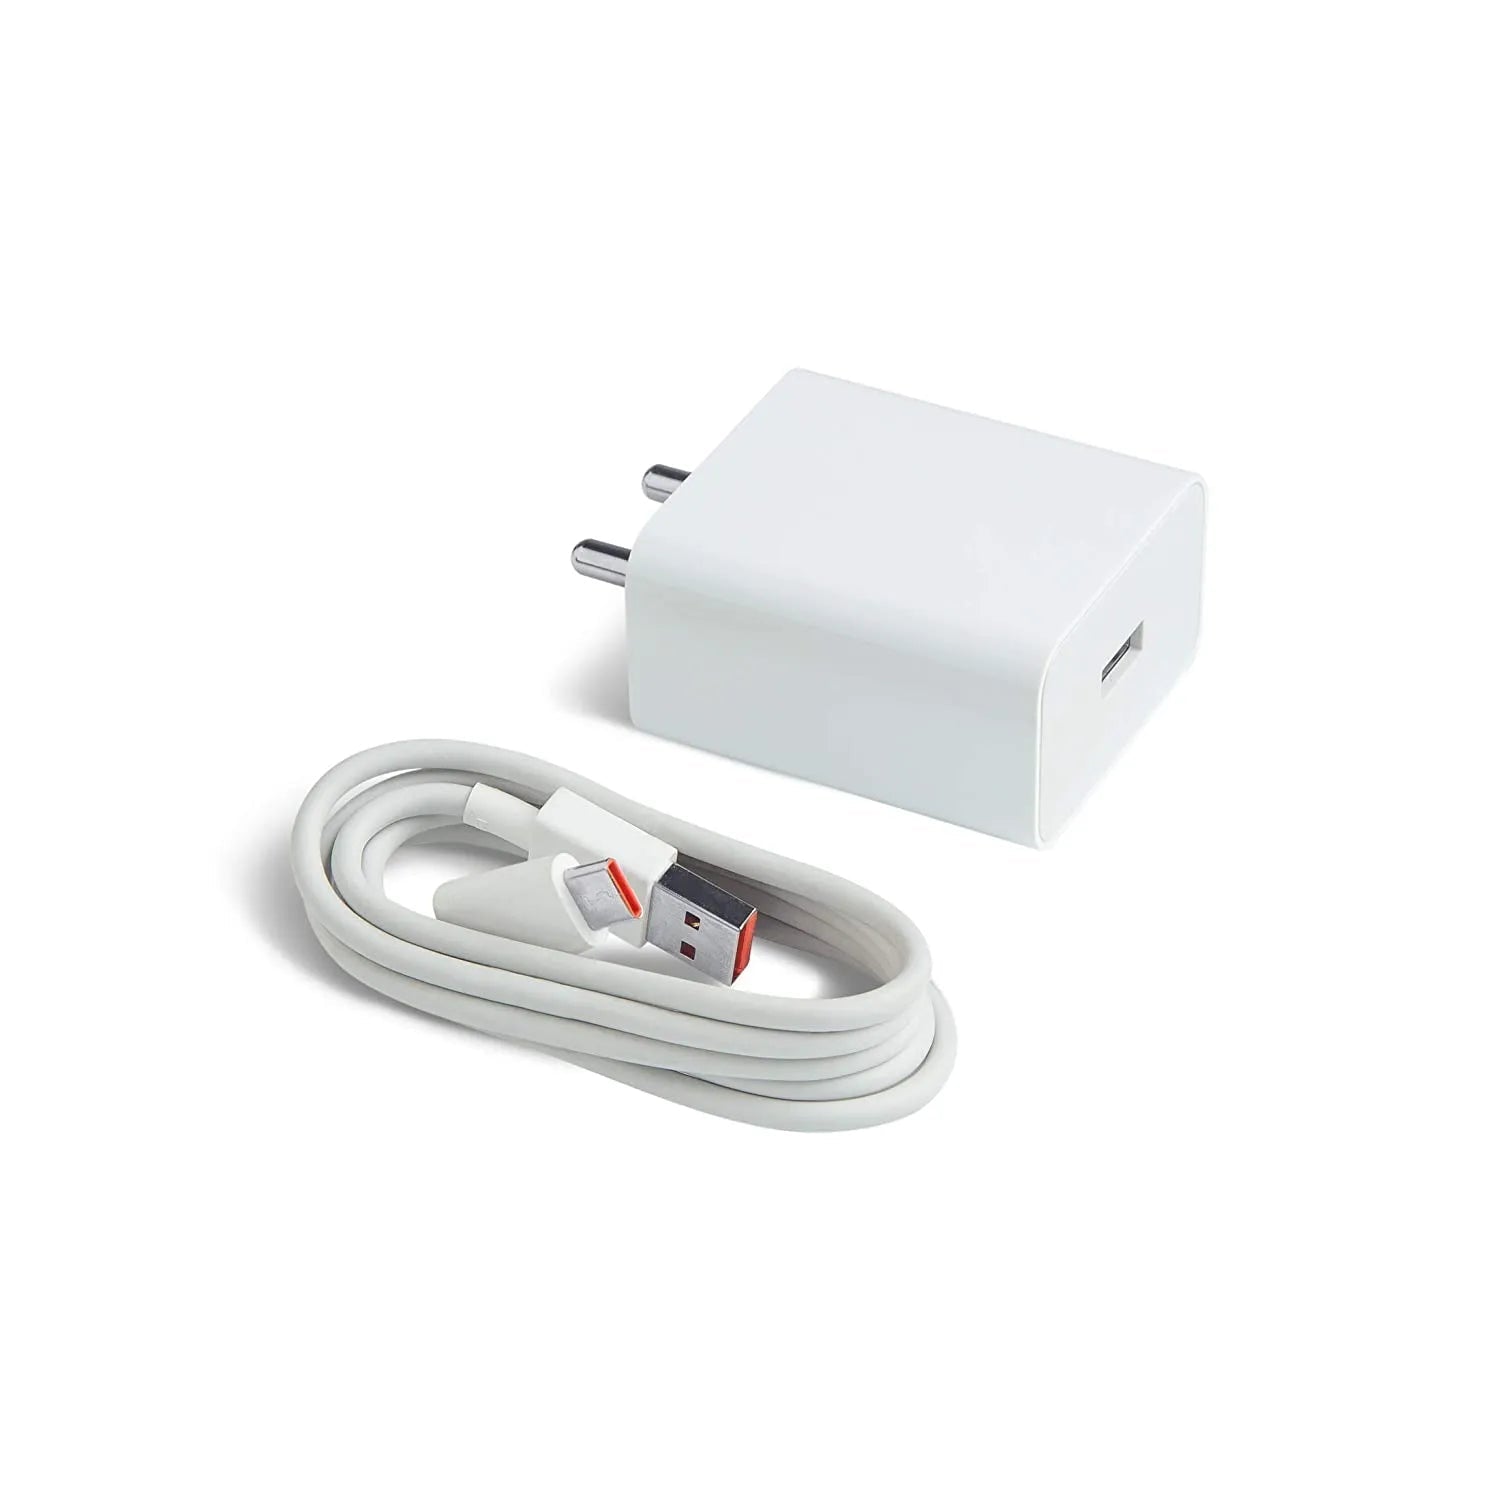 Redmi Note 11 SE 33W Fast SonicCharge 2.0 Charger With Type C Cable (White)